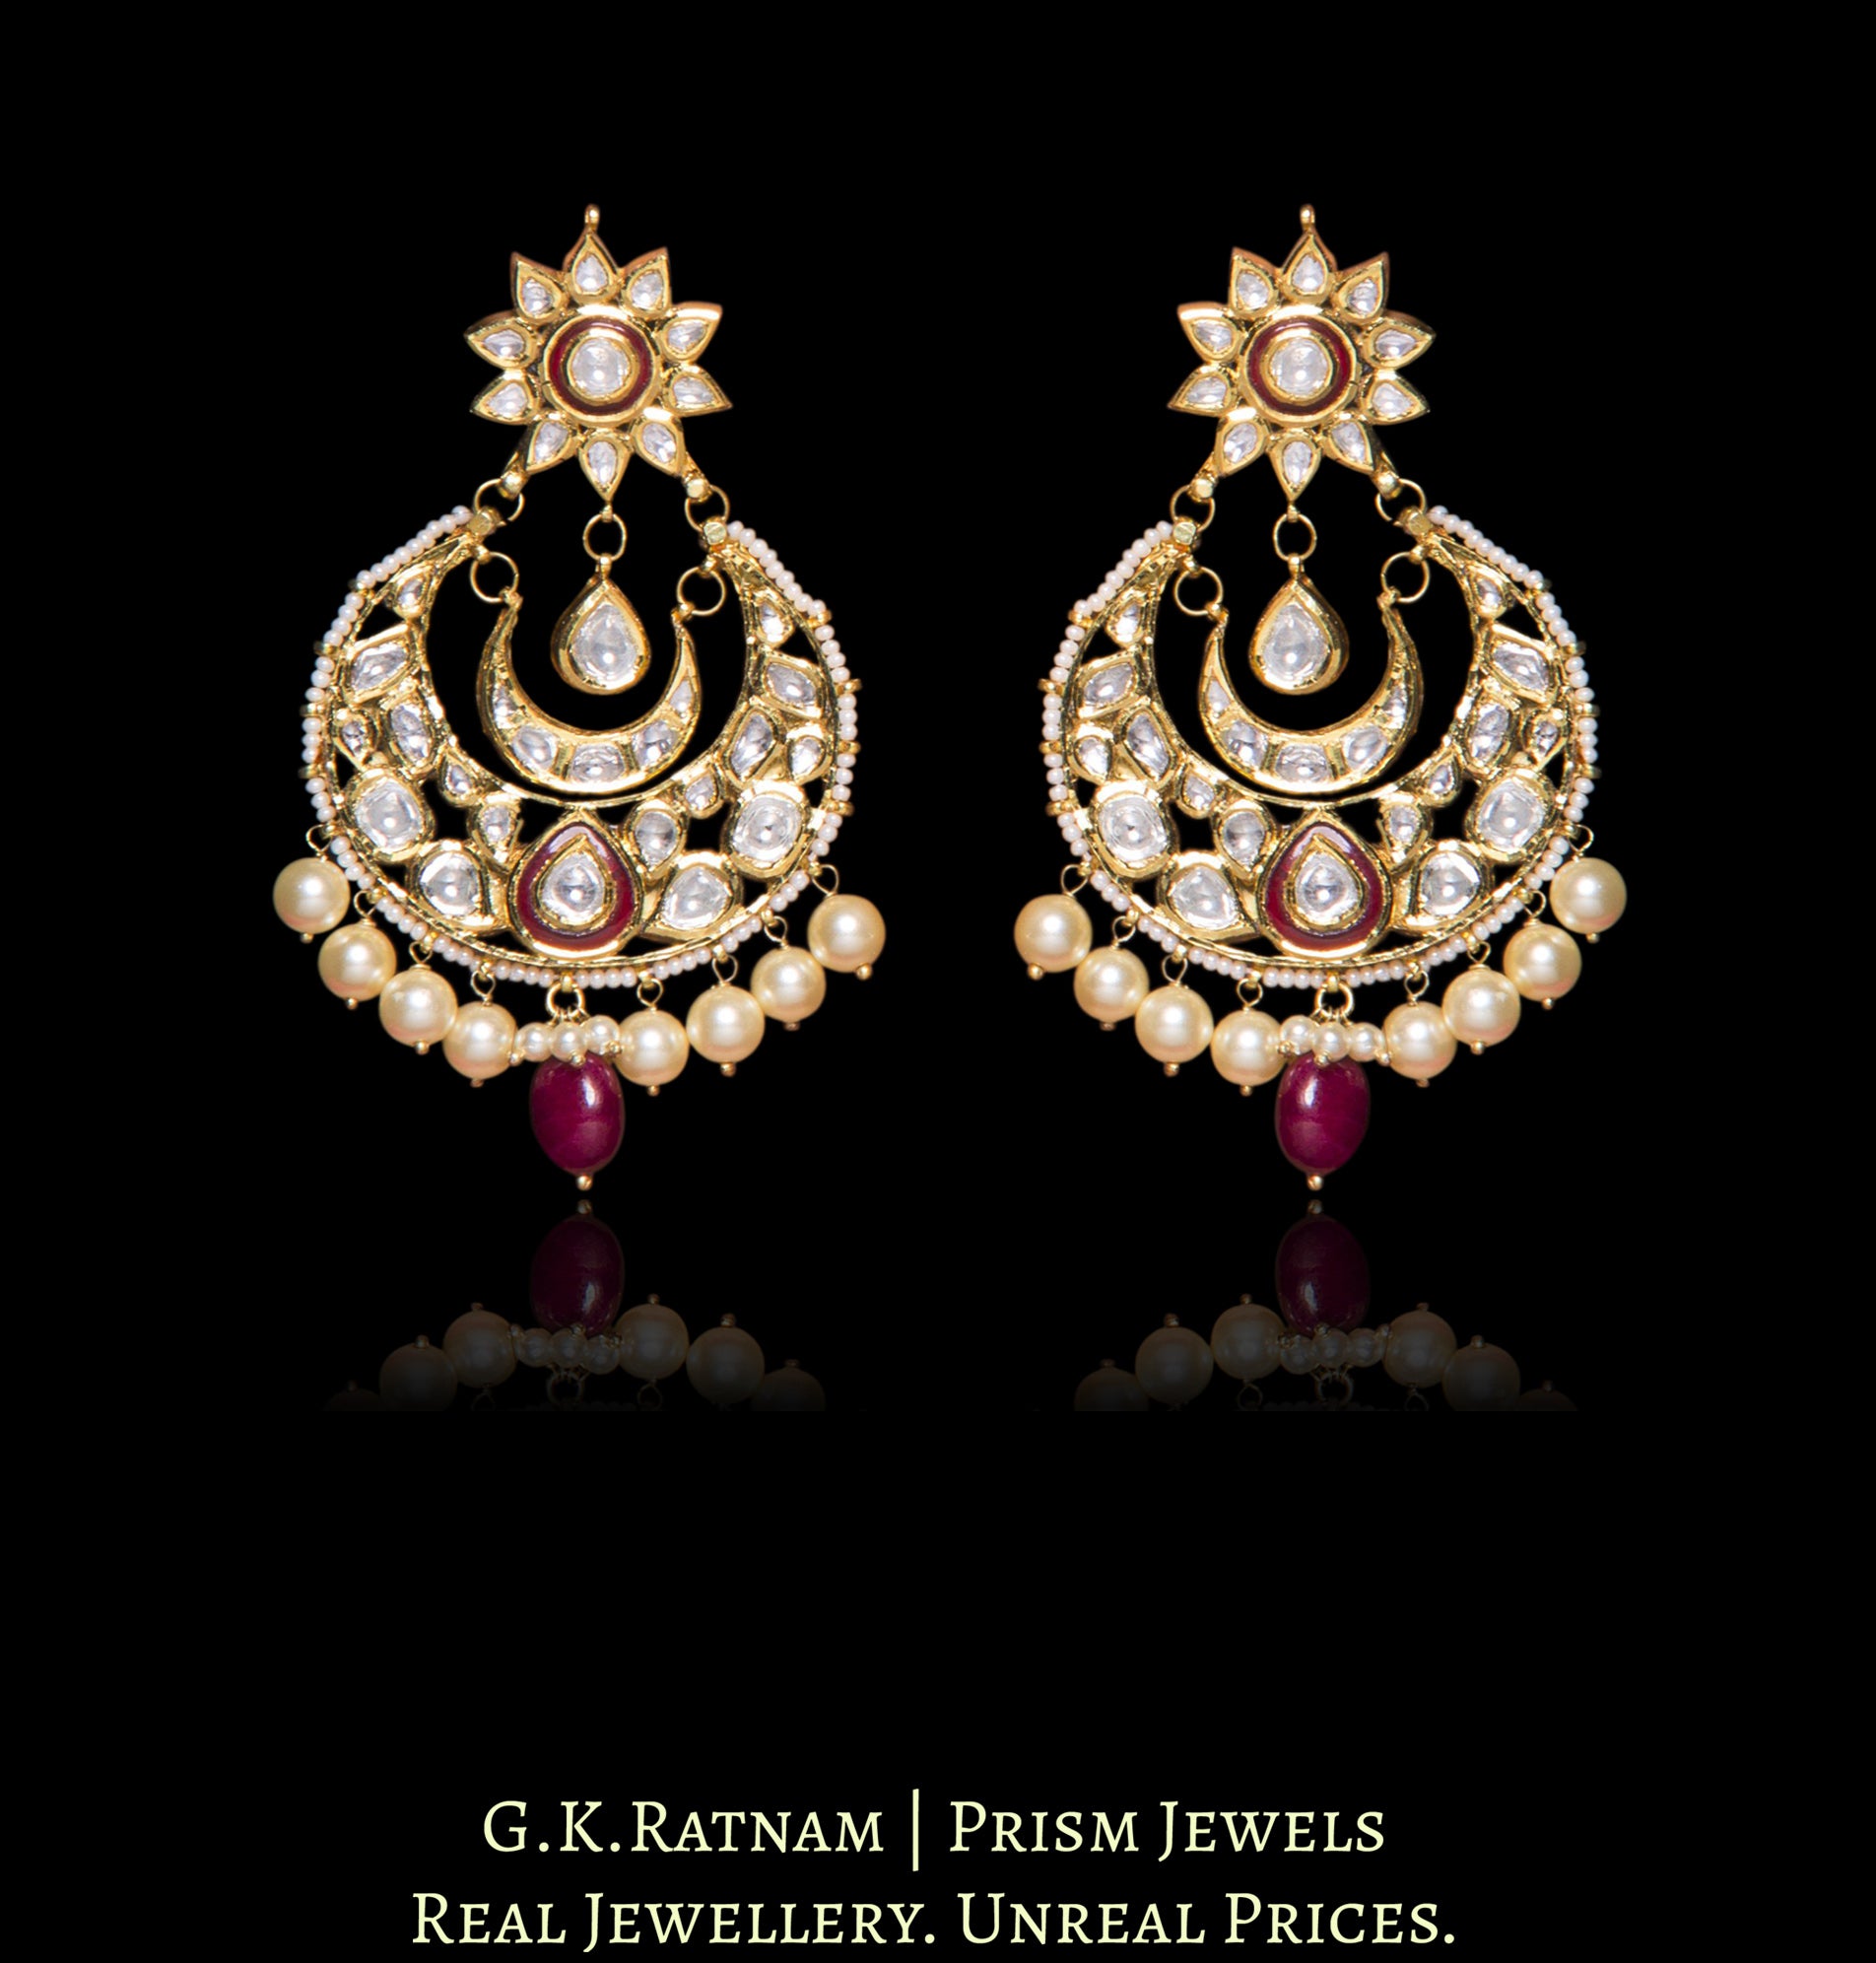 Traditional Gold and Diamond Polki Chand Bali Earring Pair with rubies and pearls